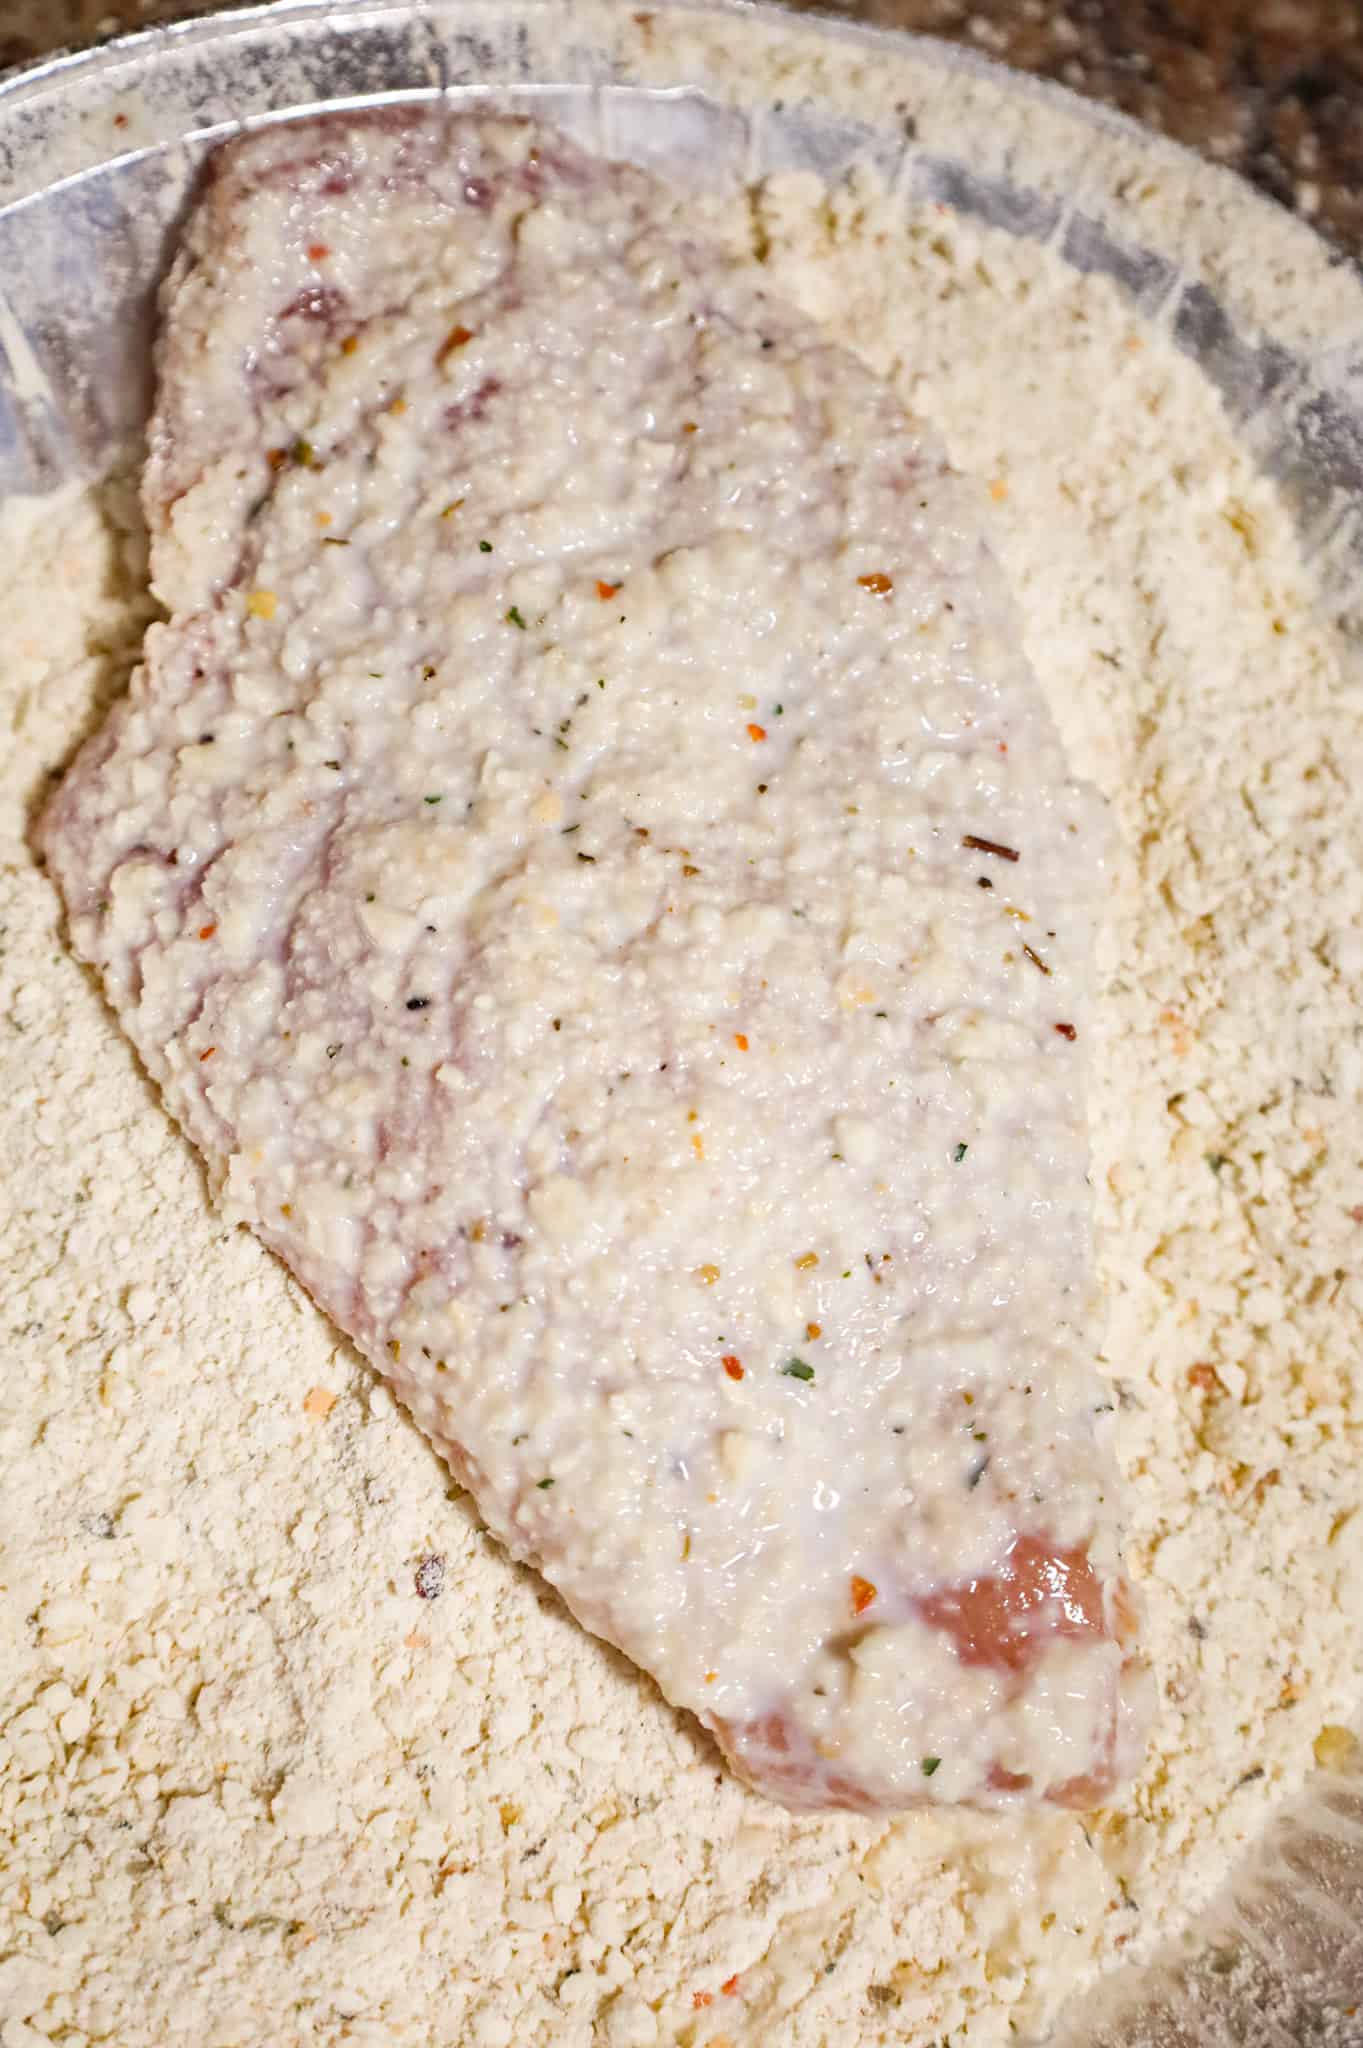 chicken breast being coated in bread crumbs